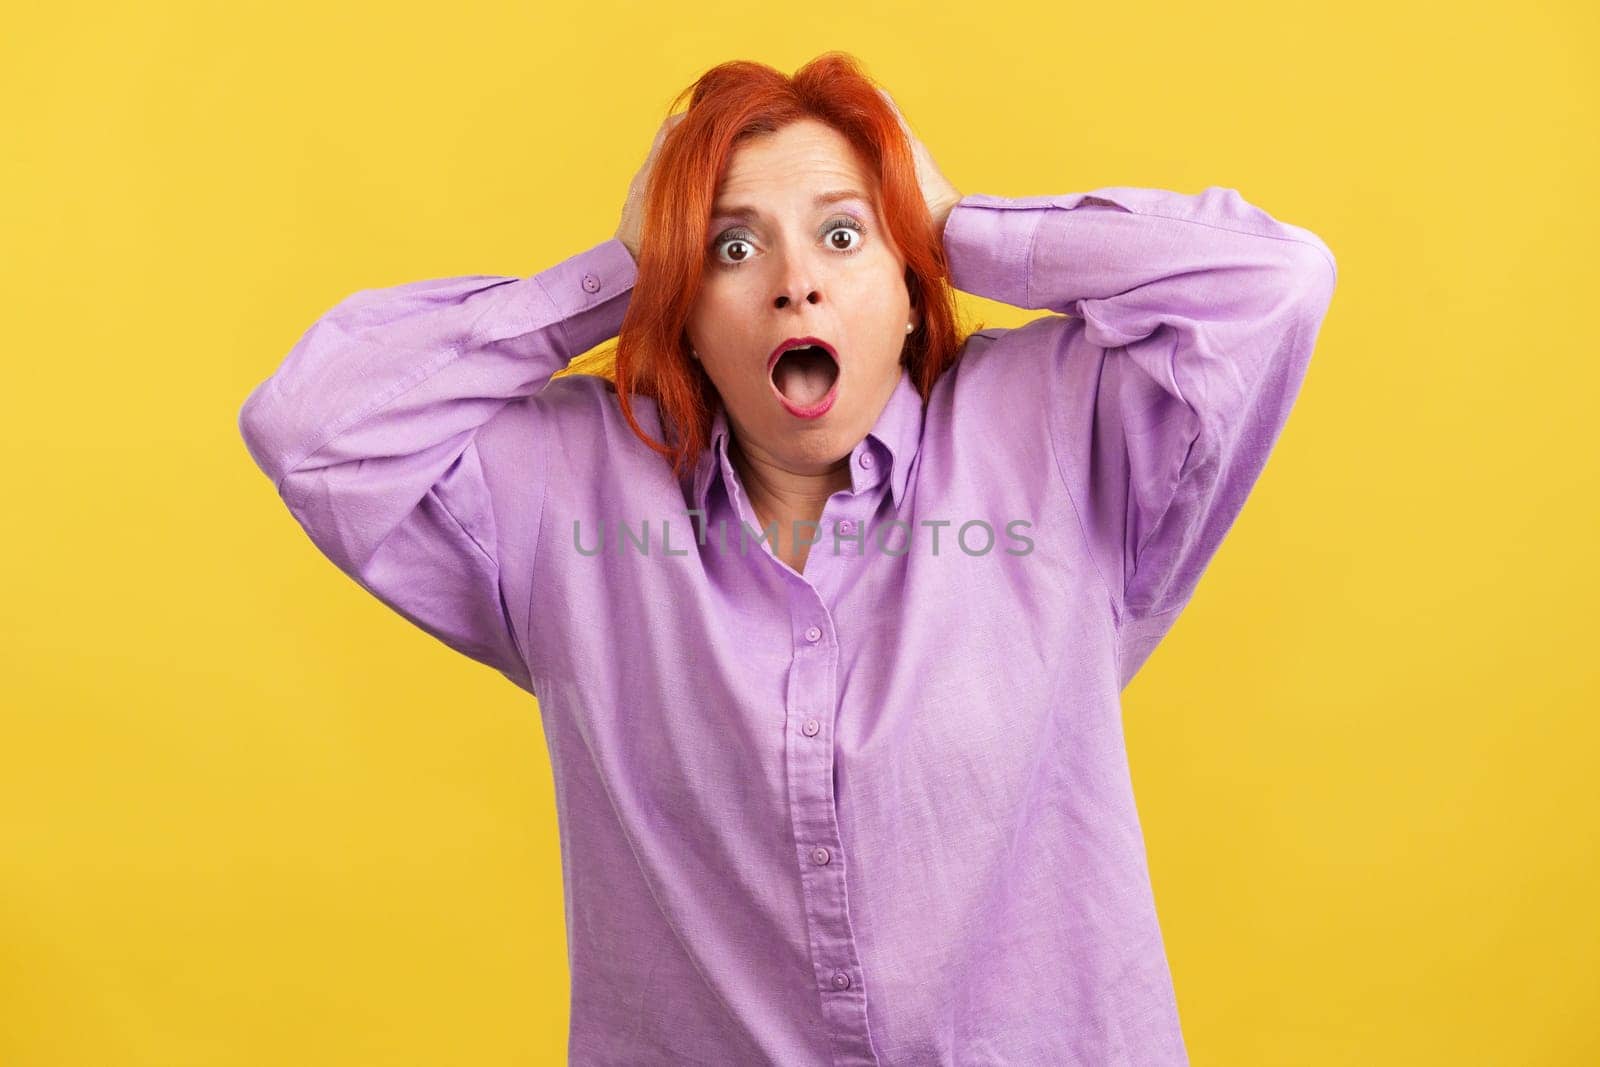 Surprised mature woman with red hair dye gesturing and looking at the camera in studio with yellow background